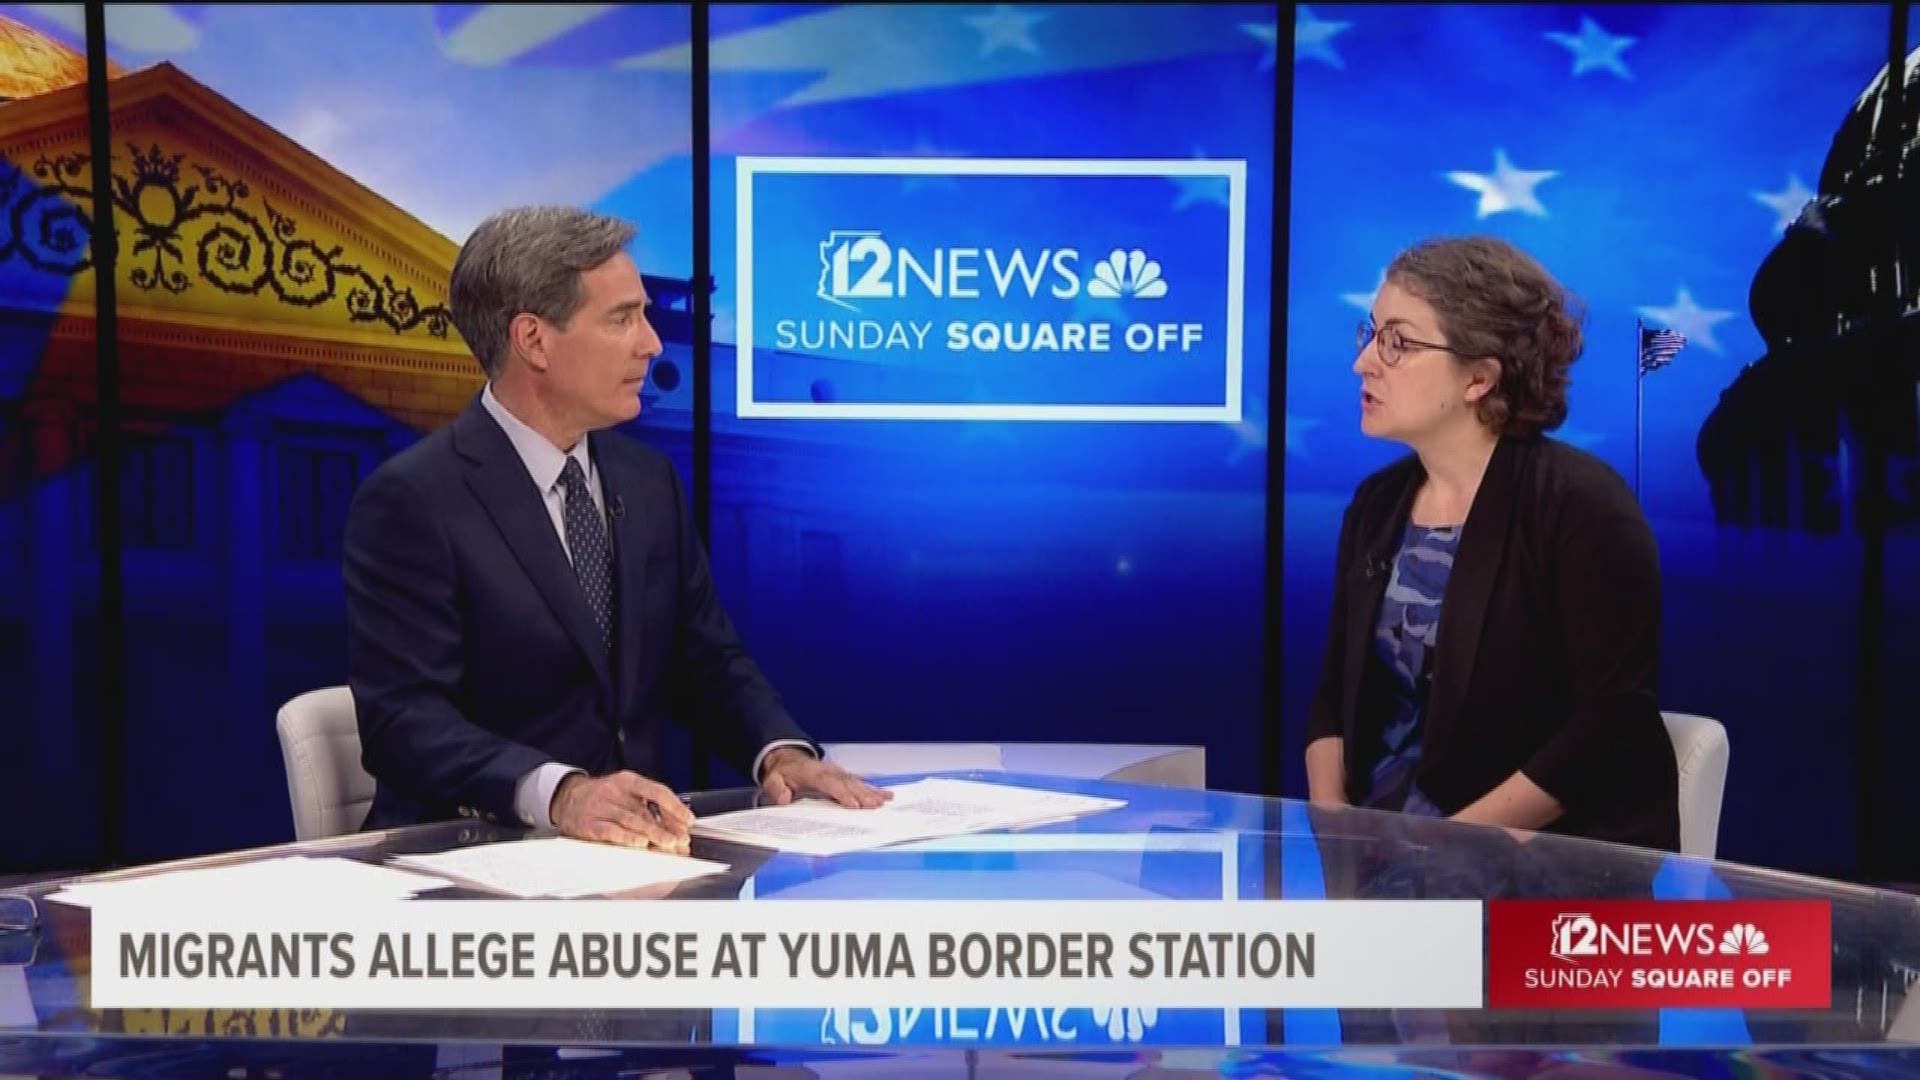 An attorney for an Arizona-based nonprofit that provides lawyers for migrant children says she wasn't surprised by an NBC News report last week detailing allegations that U.S. Customs and Border Protection agents abused migrant children at a Yuma detention center.